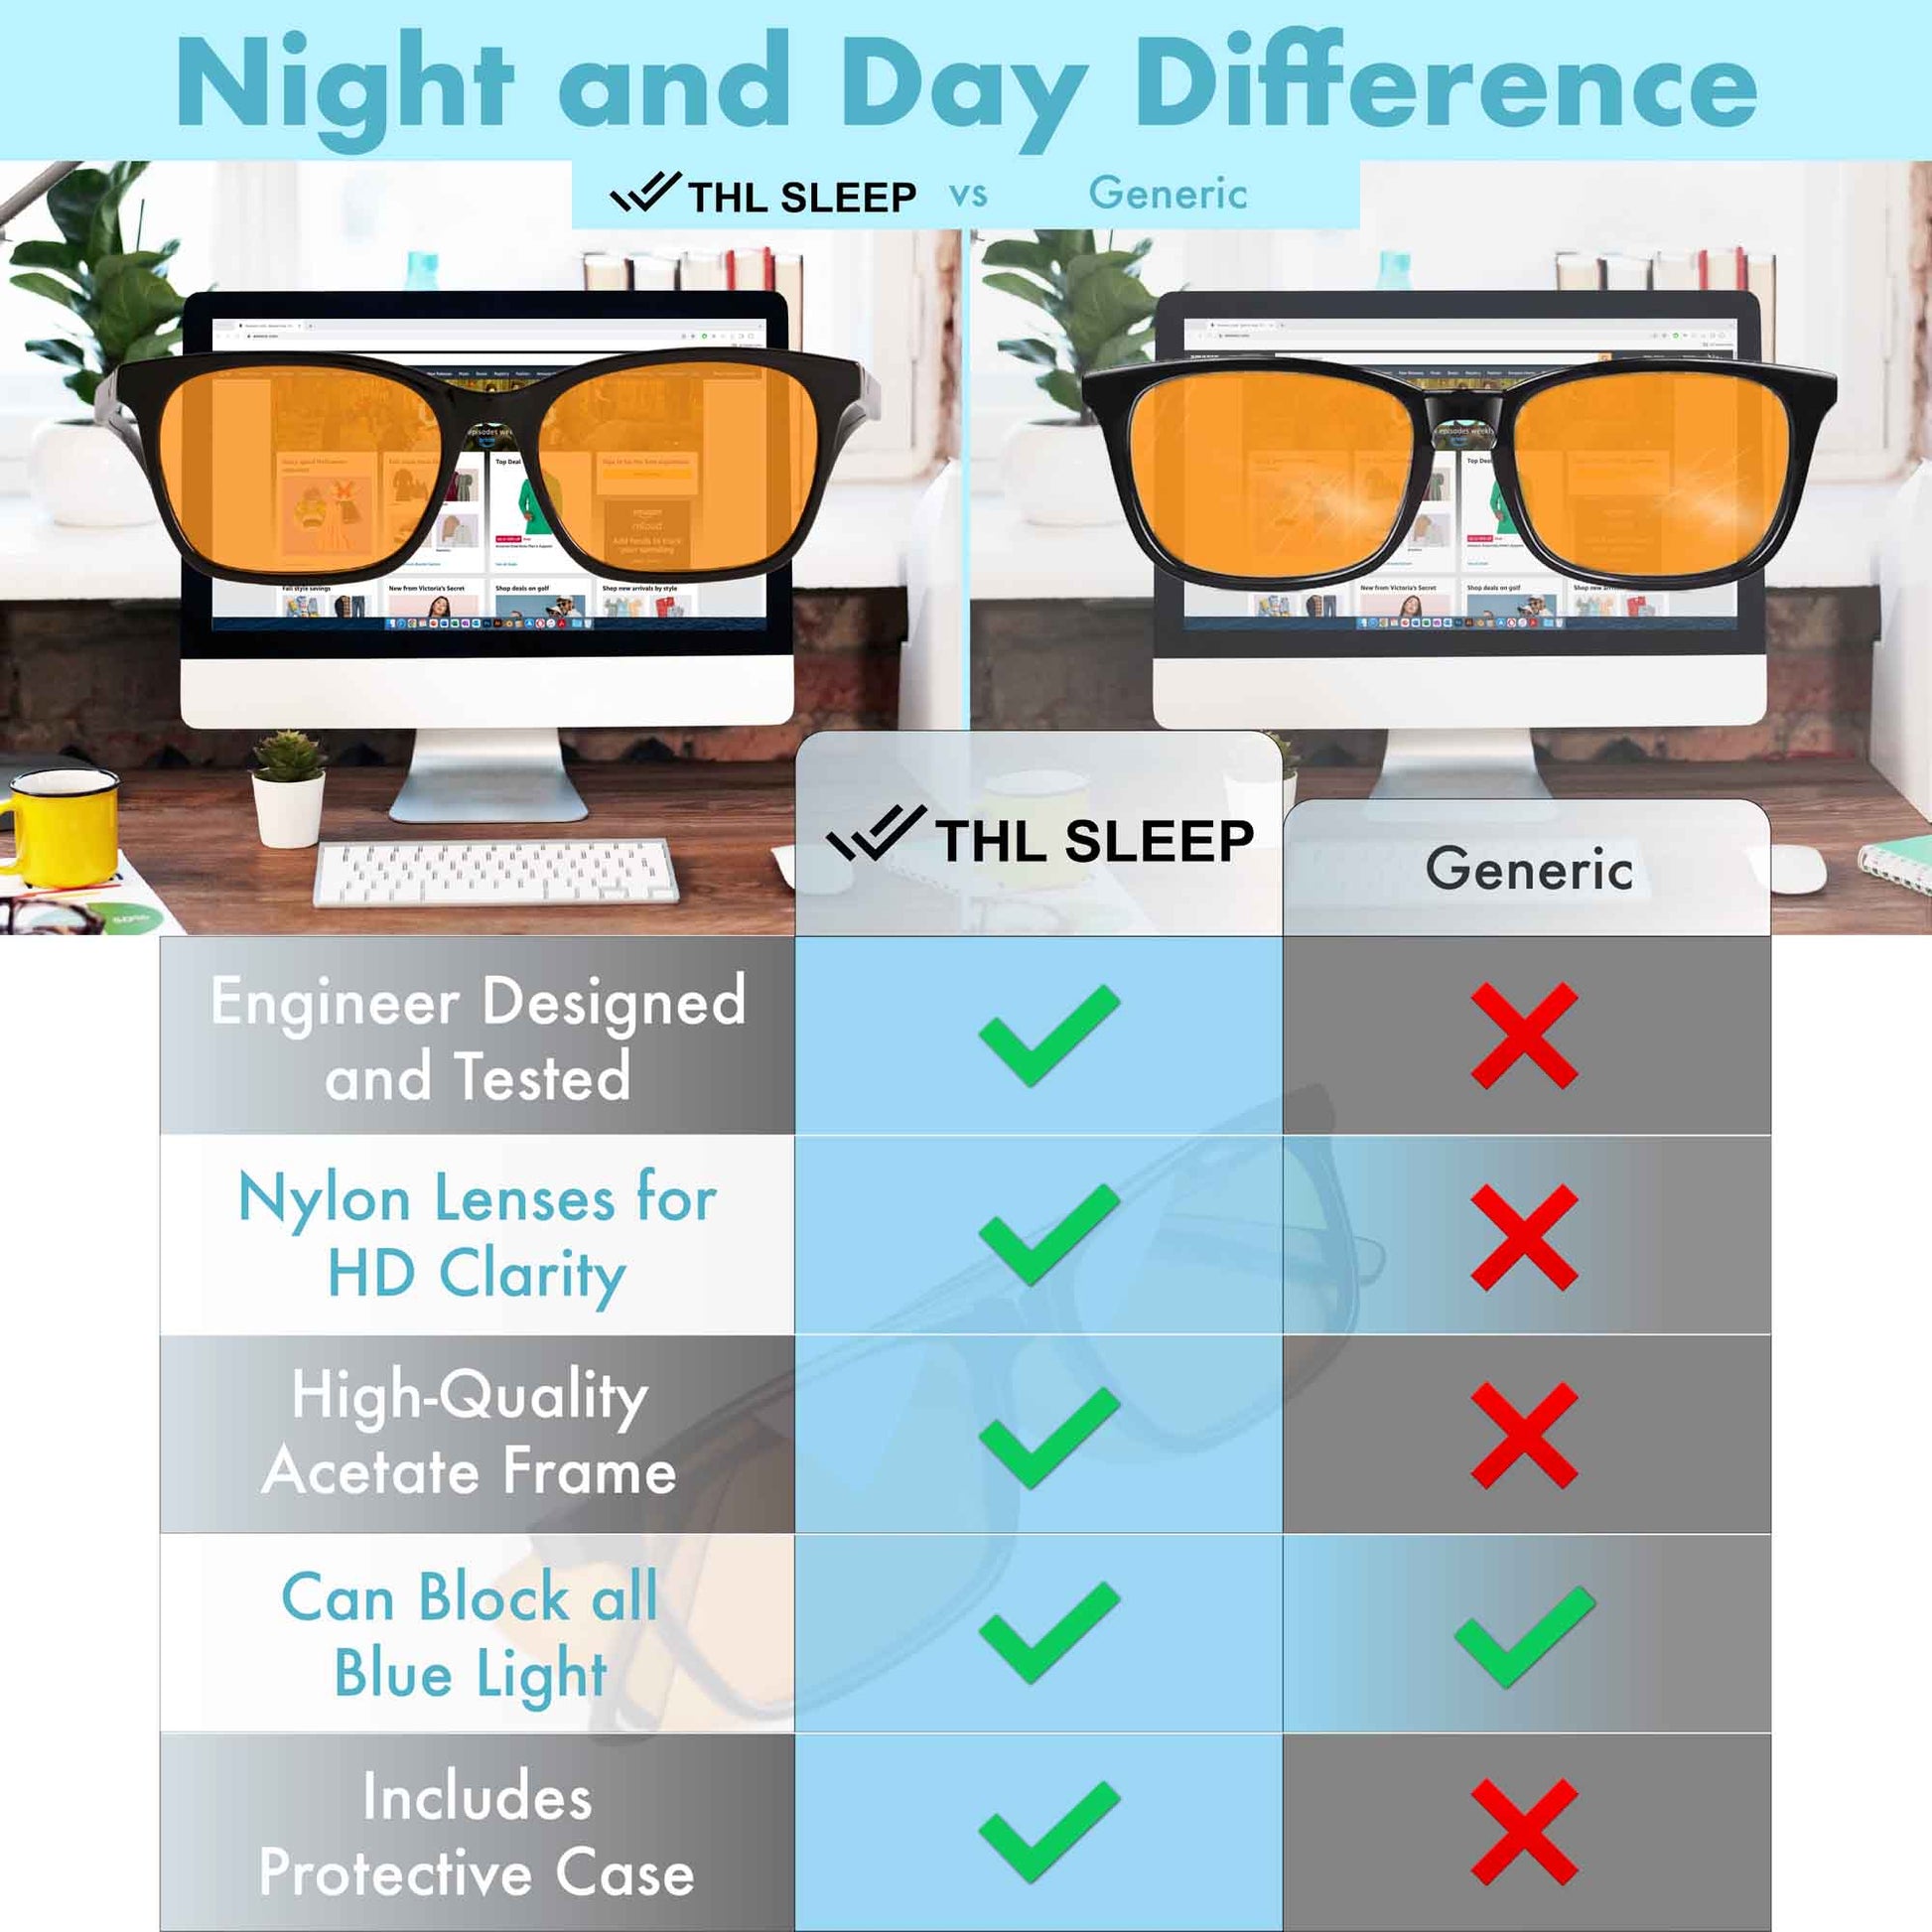 Blue blocker glasses for night vs day - what's the difference? - EyeShield